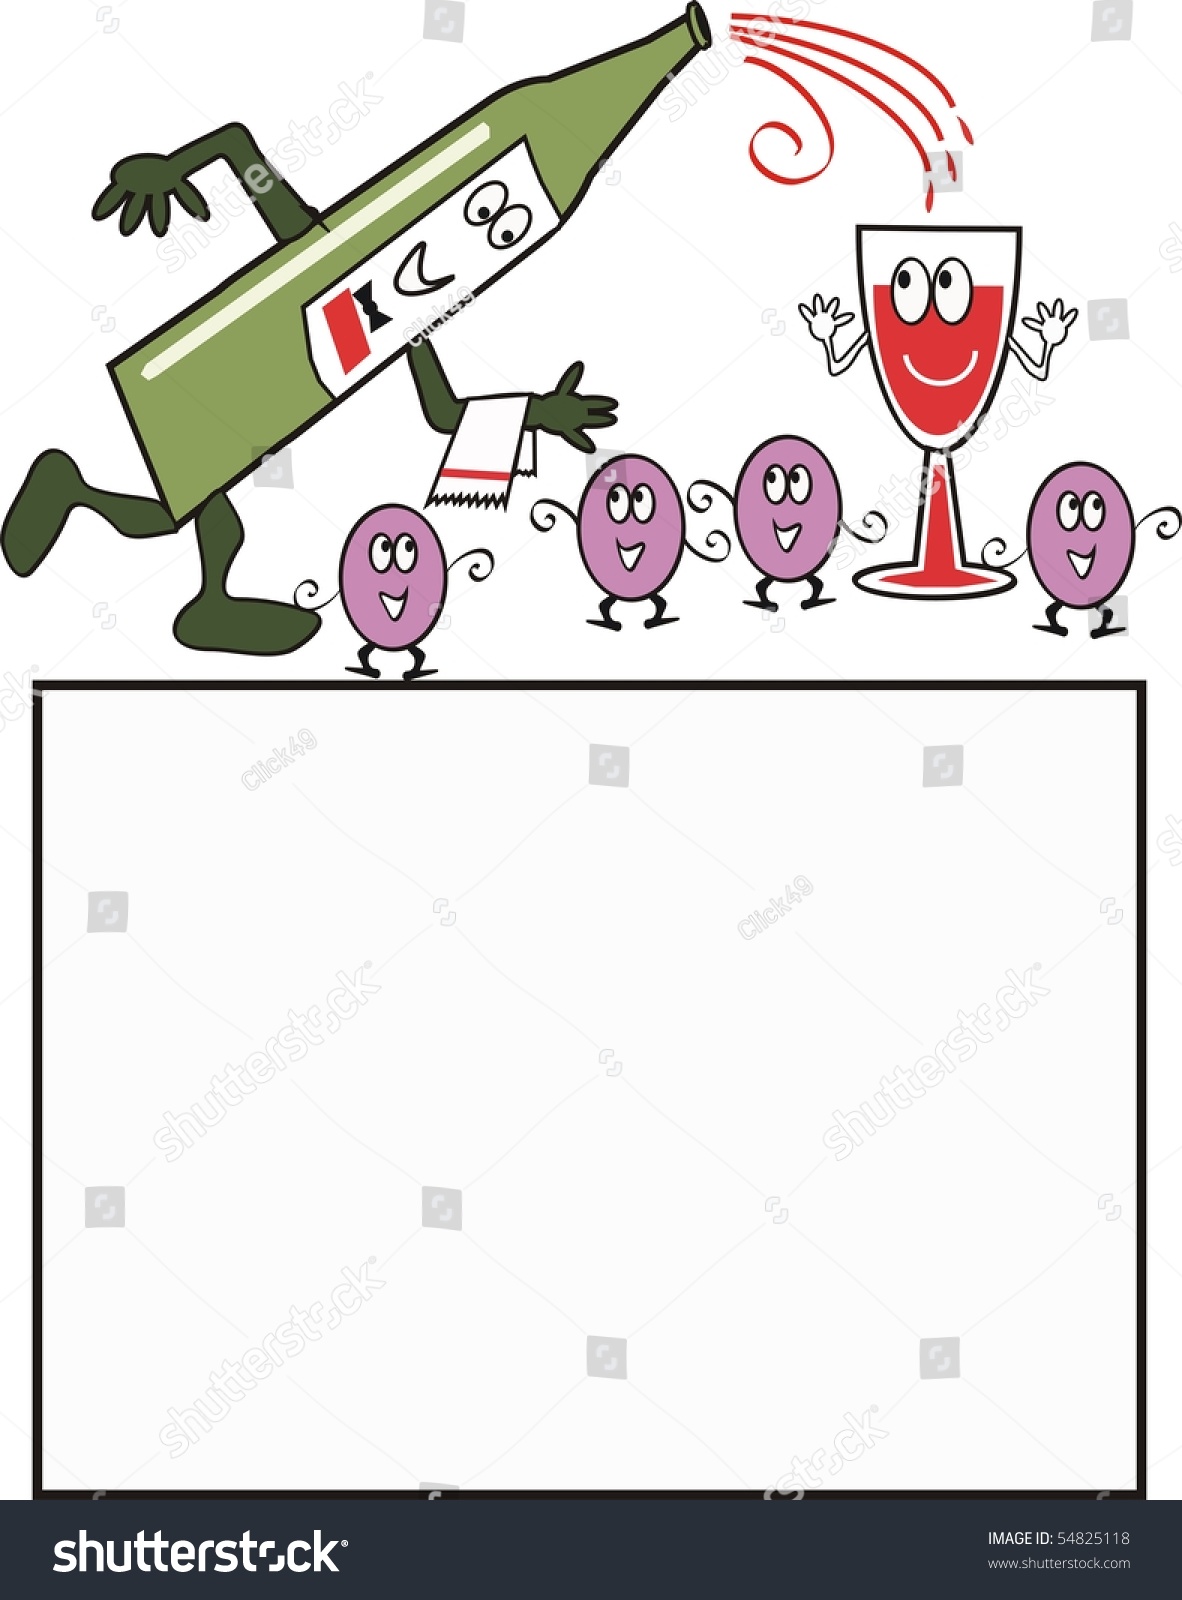 Cartoon Of Animated Bottle Pouring Out Red Wine Into Glass. Stock